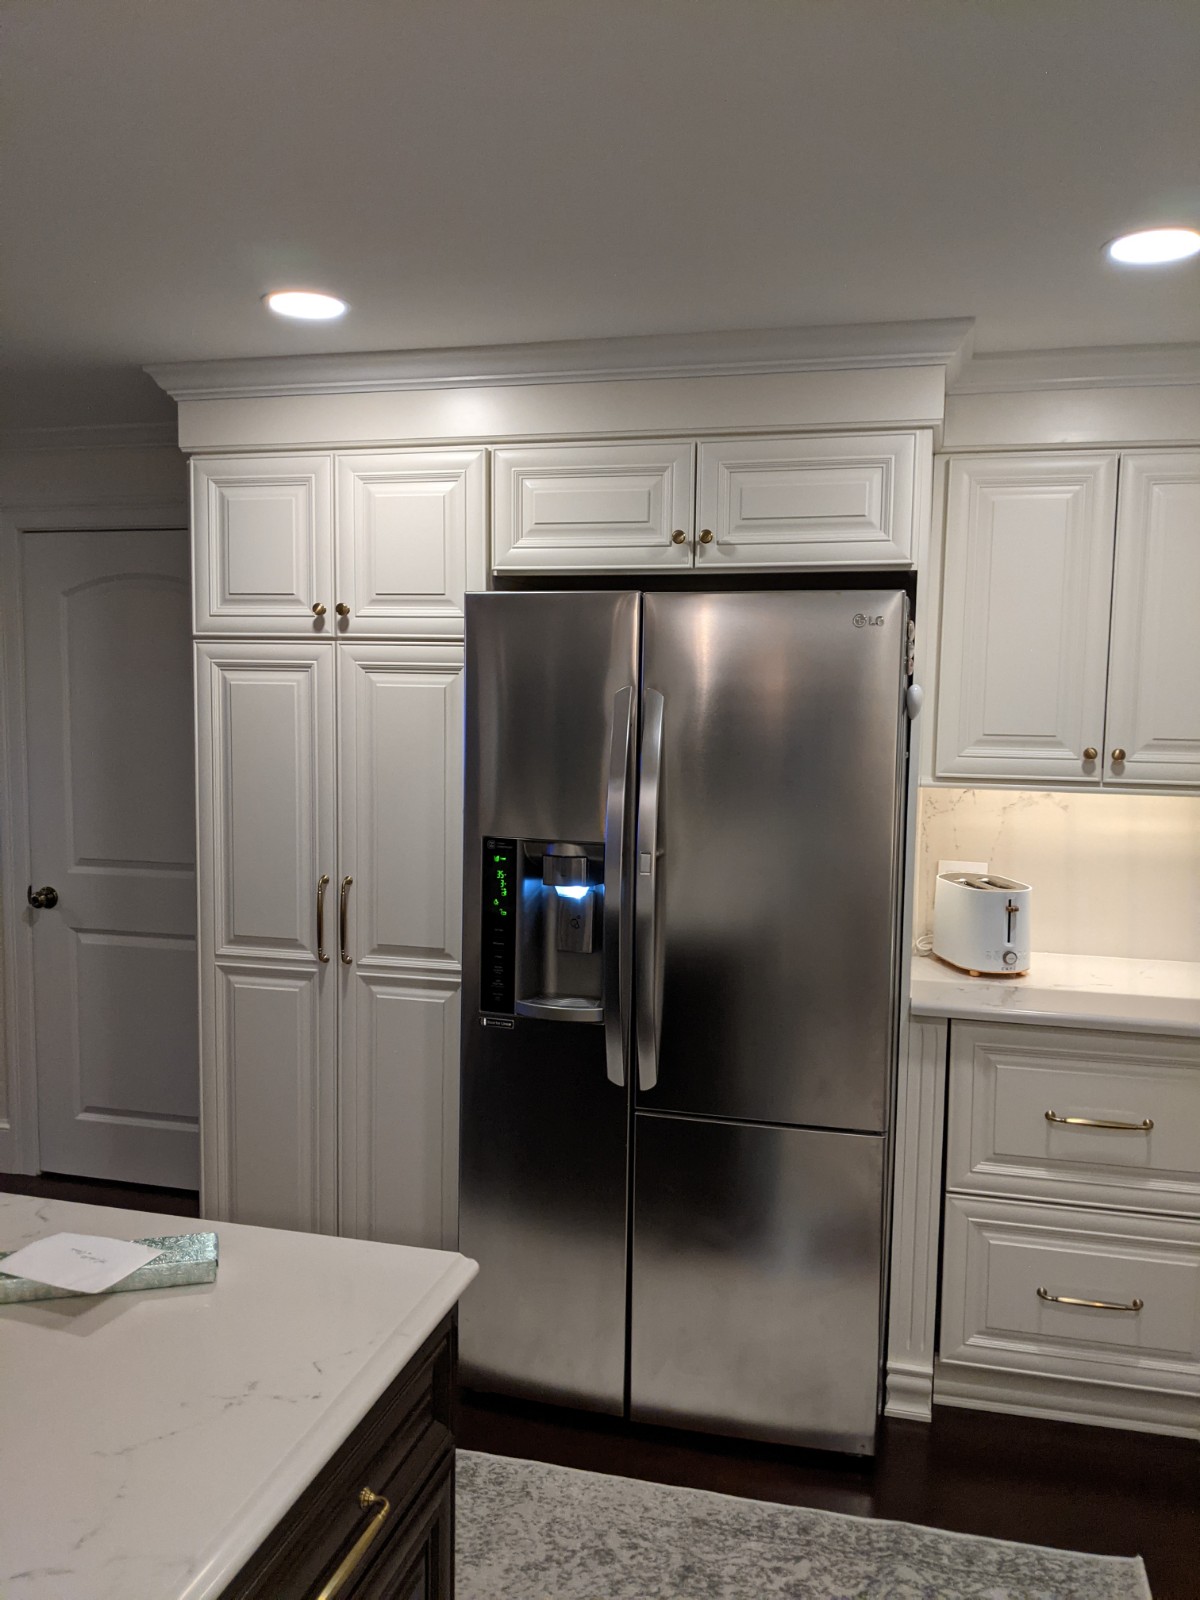 Another view of the refrigerator area.